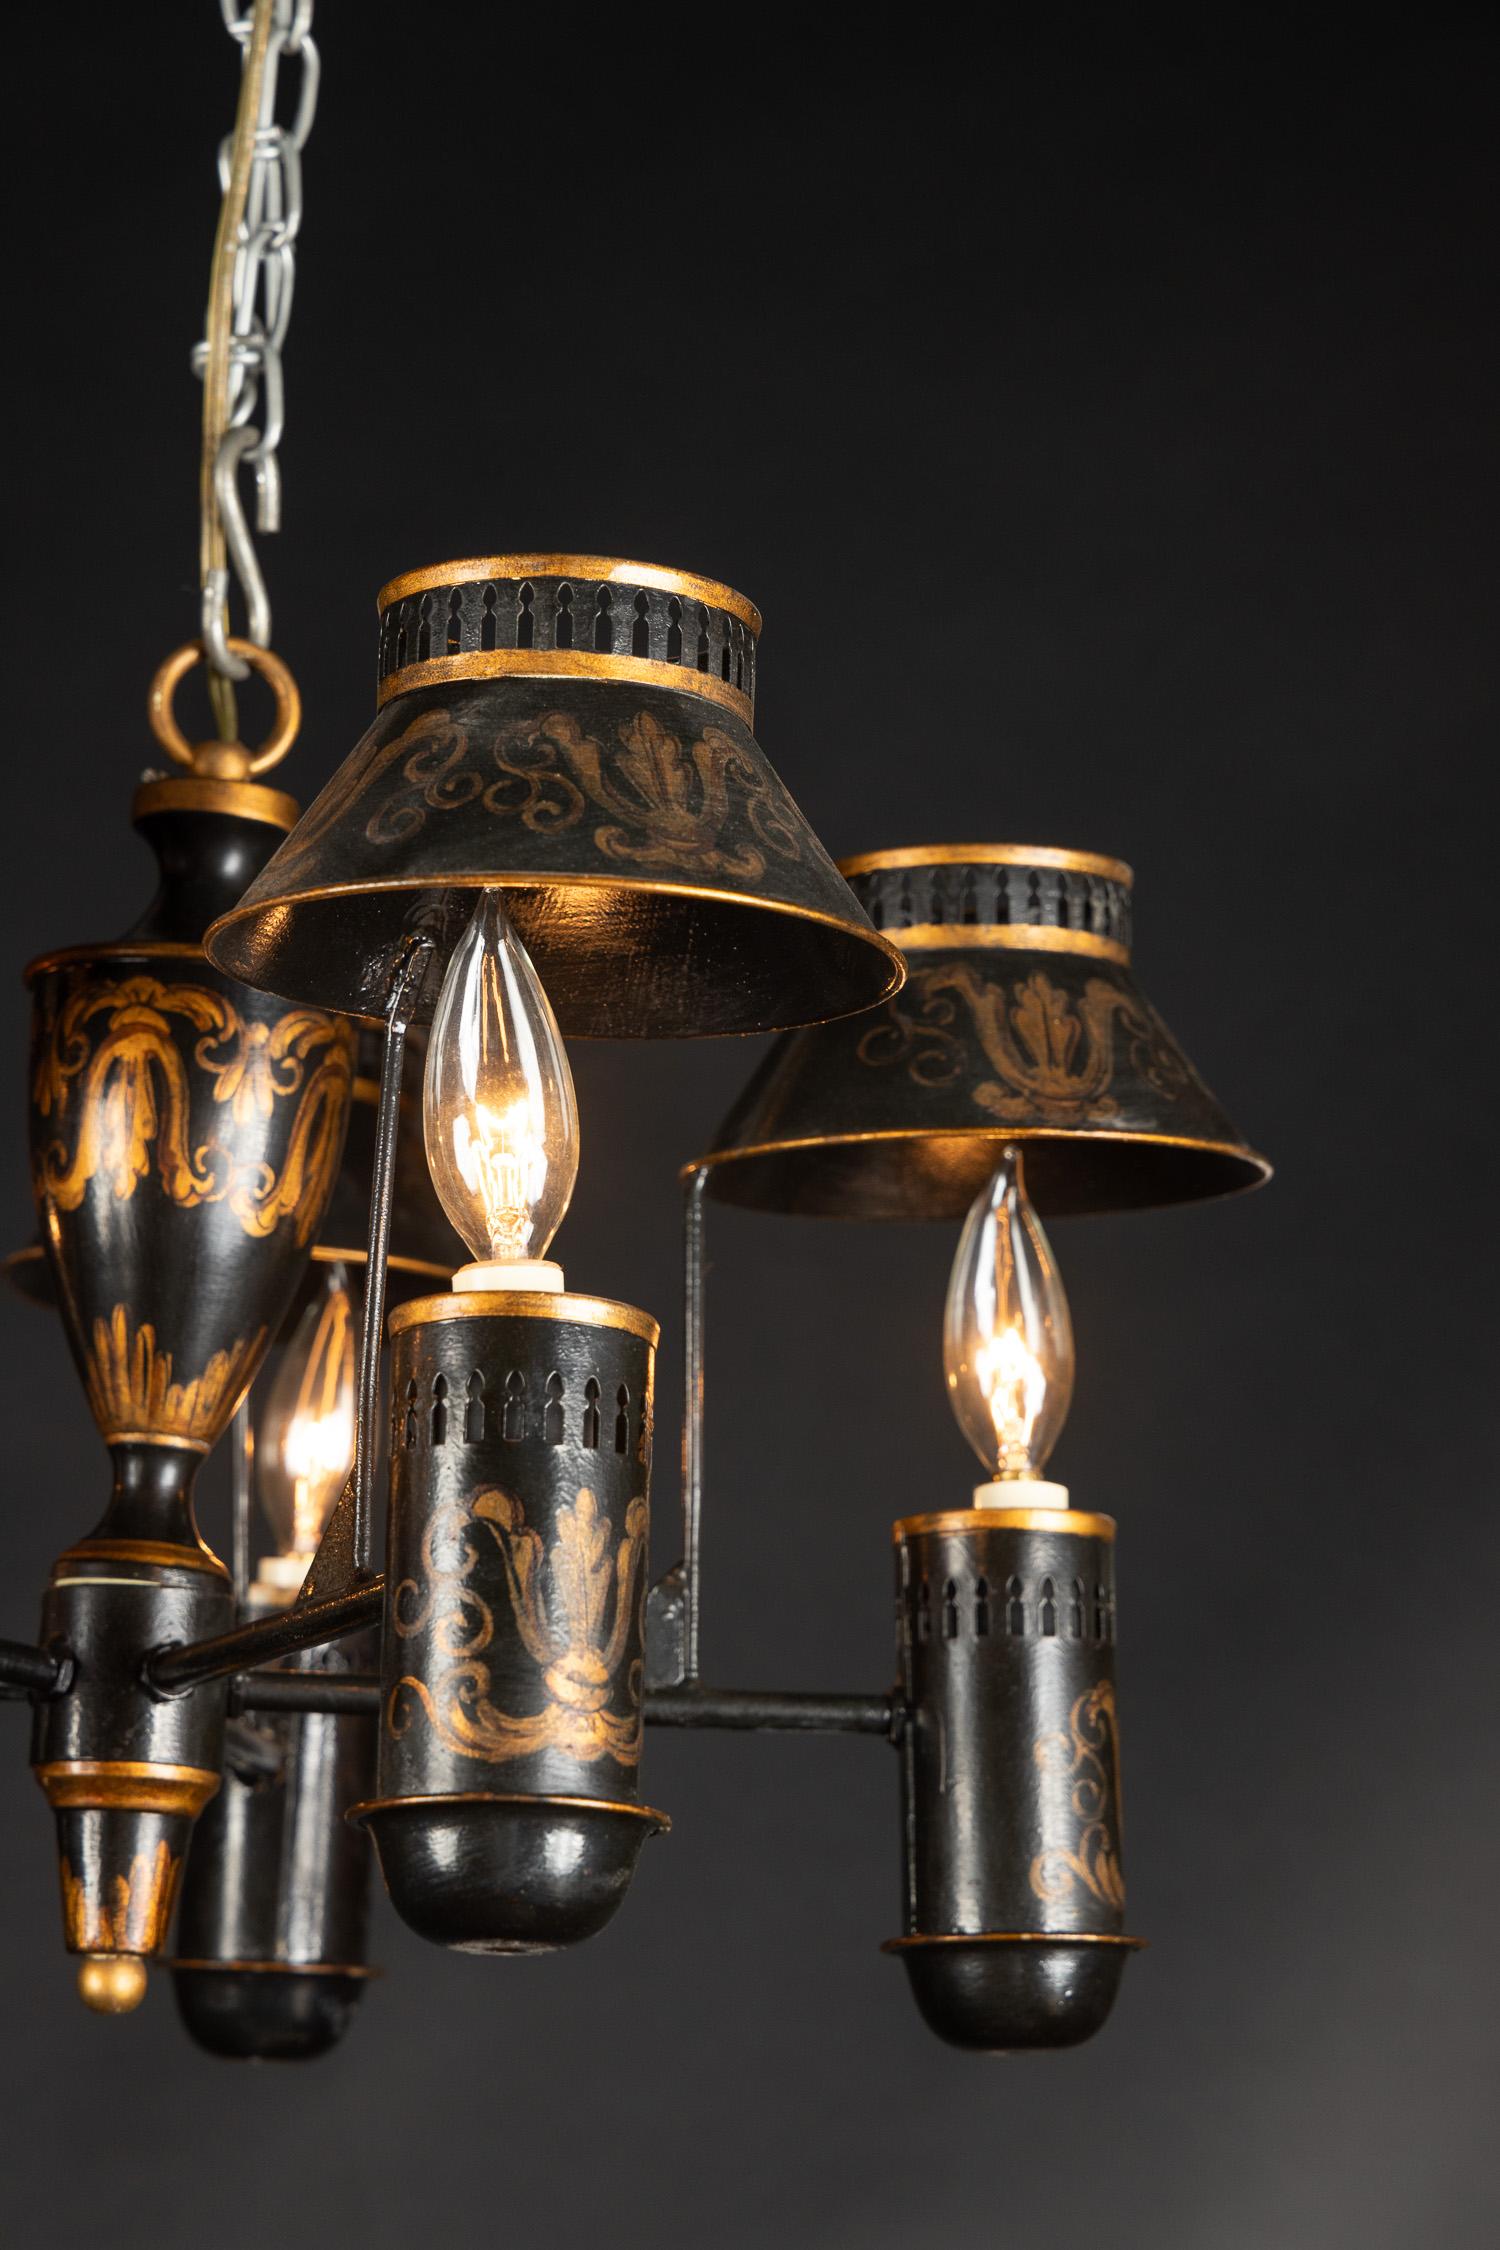 This beautiful French six light chandelier is made of tole (tin), and dates back to the mid-20th Century. The fixture is hand painted with delicate scroll work, and features light shades above each light. The light shades are pierced at top, a